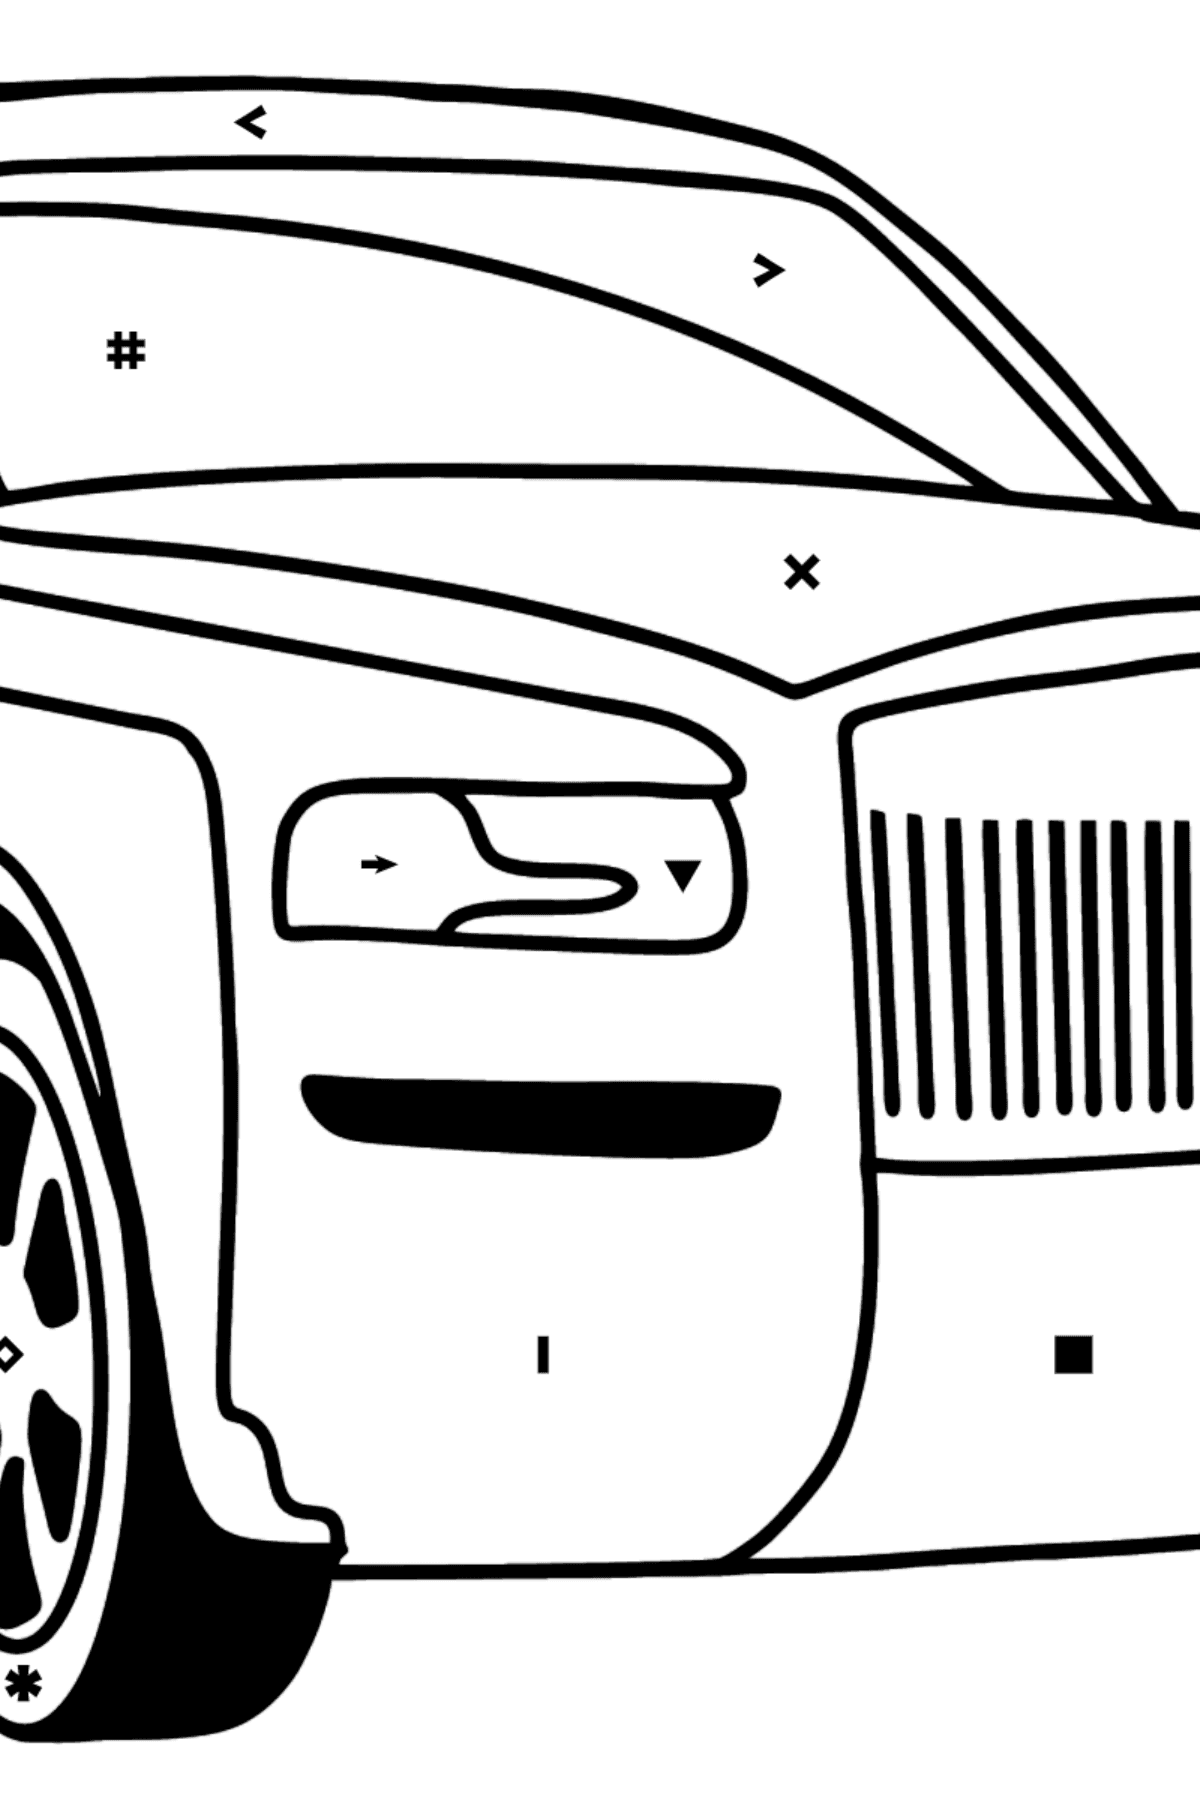 Rolls Royce Cullinan Car coloring page - Coloring by Symbols for Kids